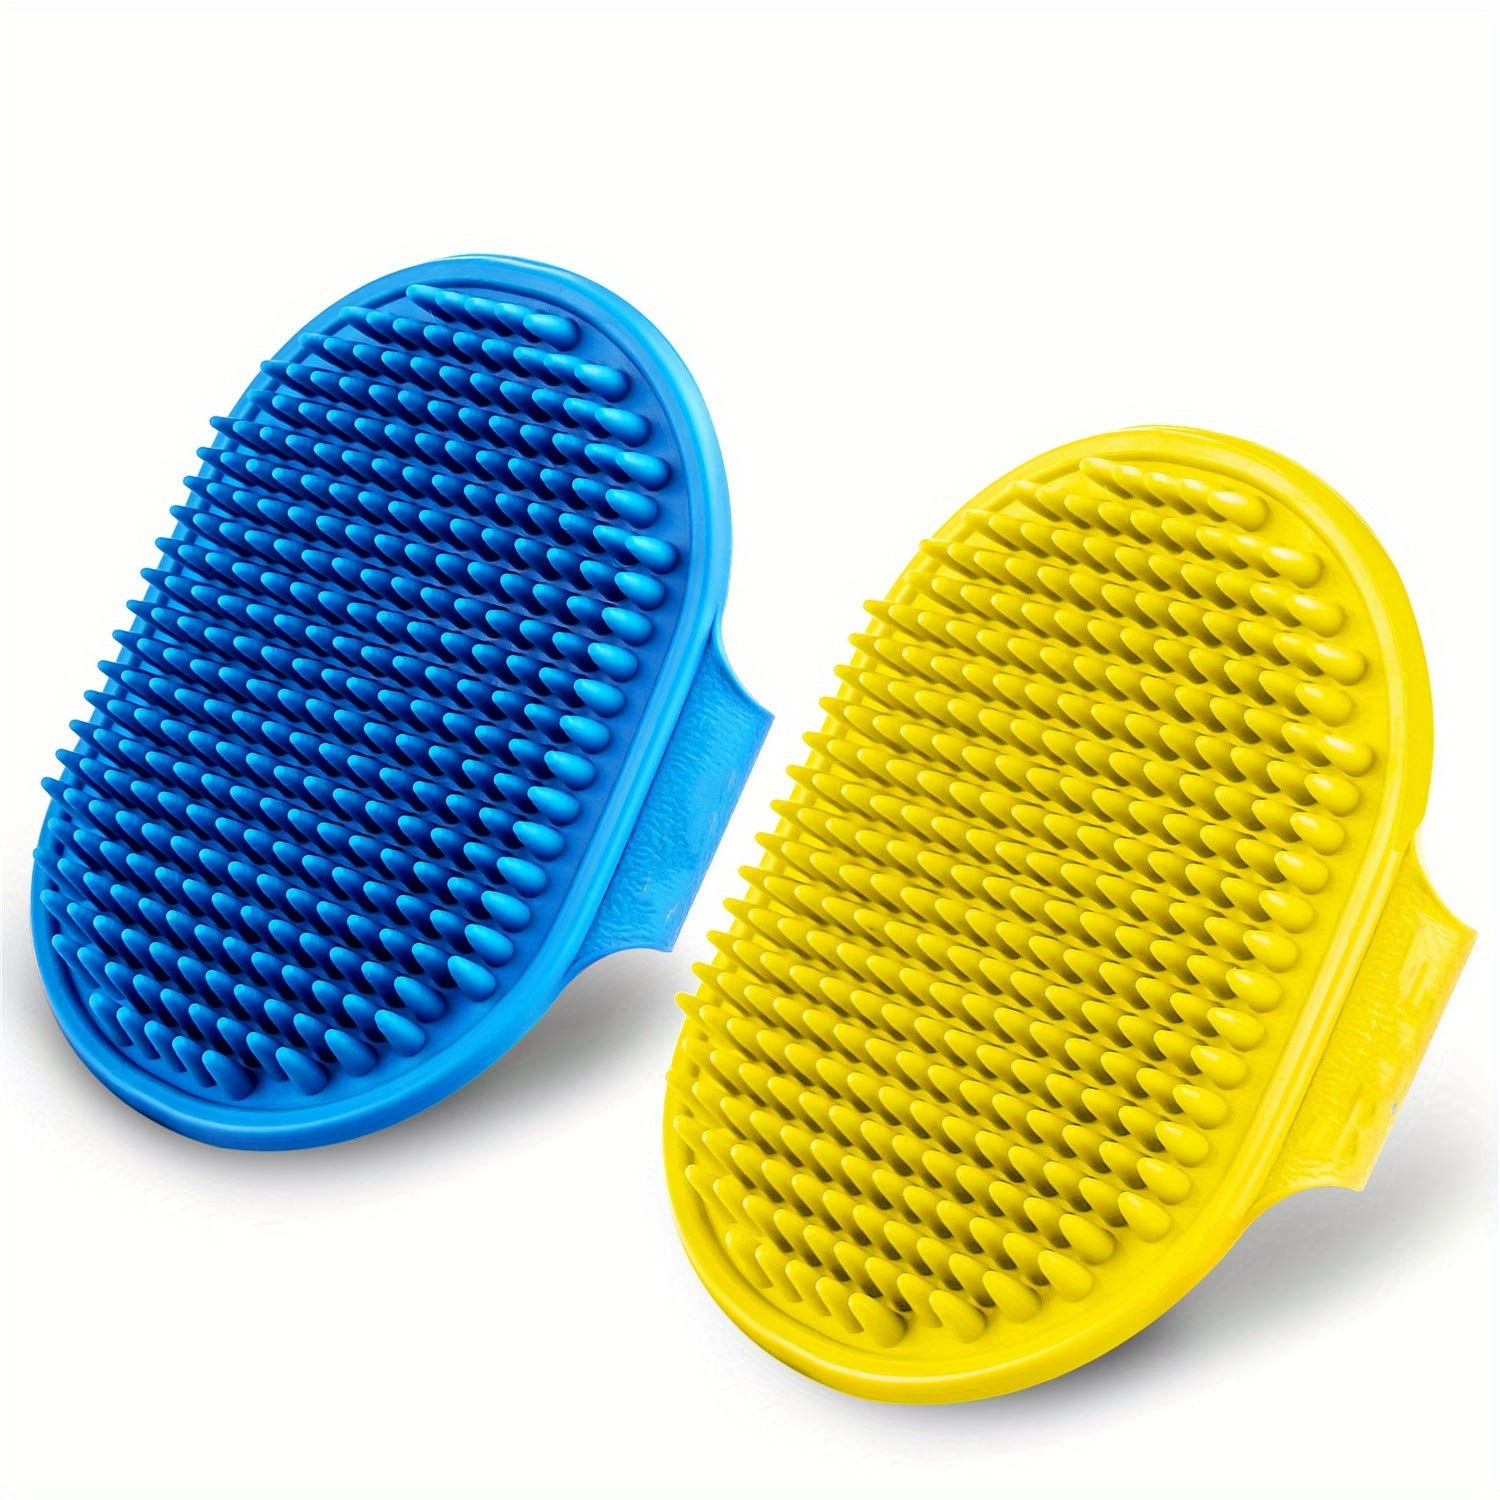 Dog Bath Brush,Cat Shampoo Brush,Soft Silicone Pet Grooming Brush for Long  Short Haired Dogs and Cats,Soothing Massage Pet Comb